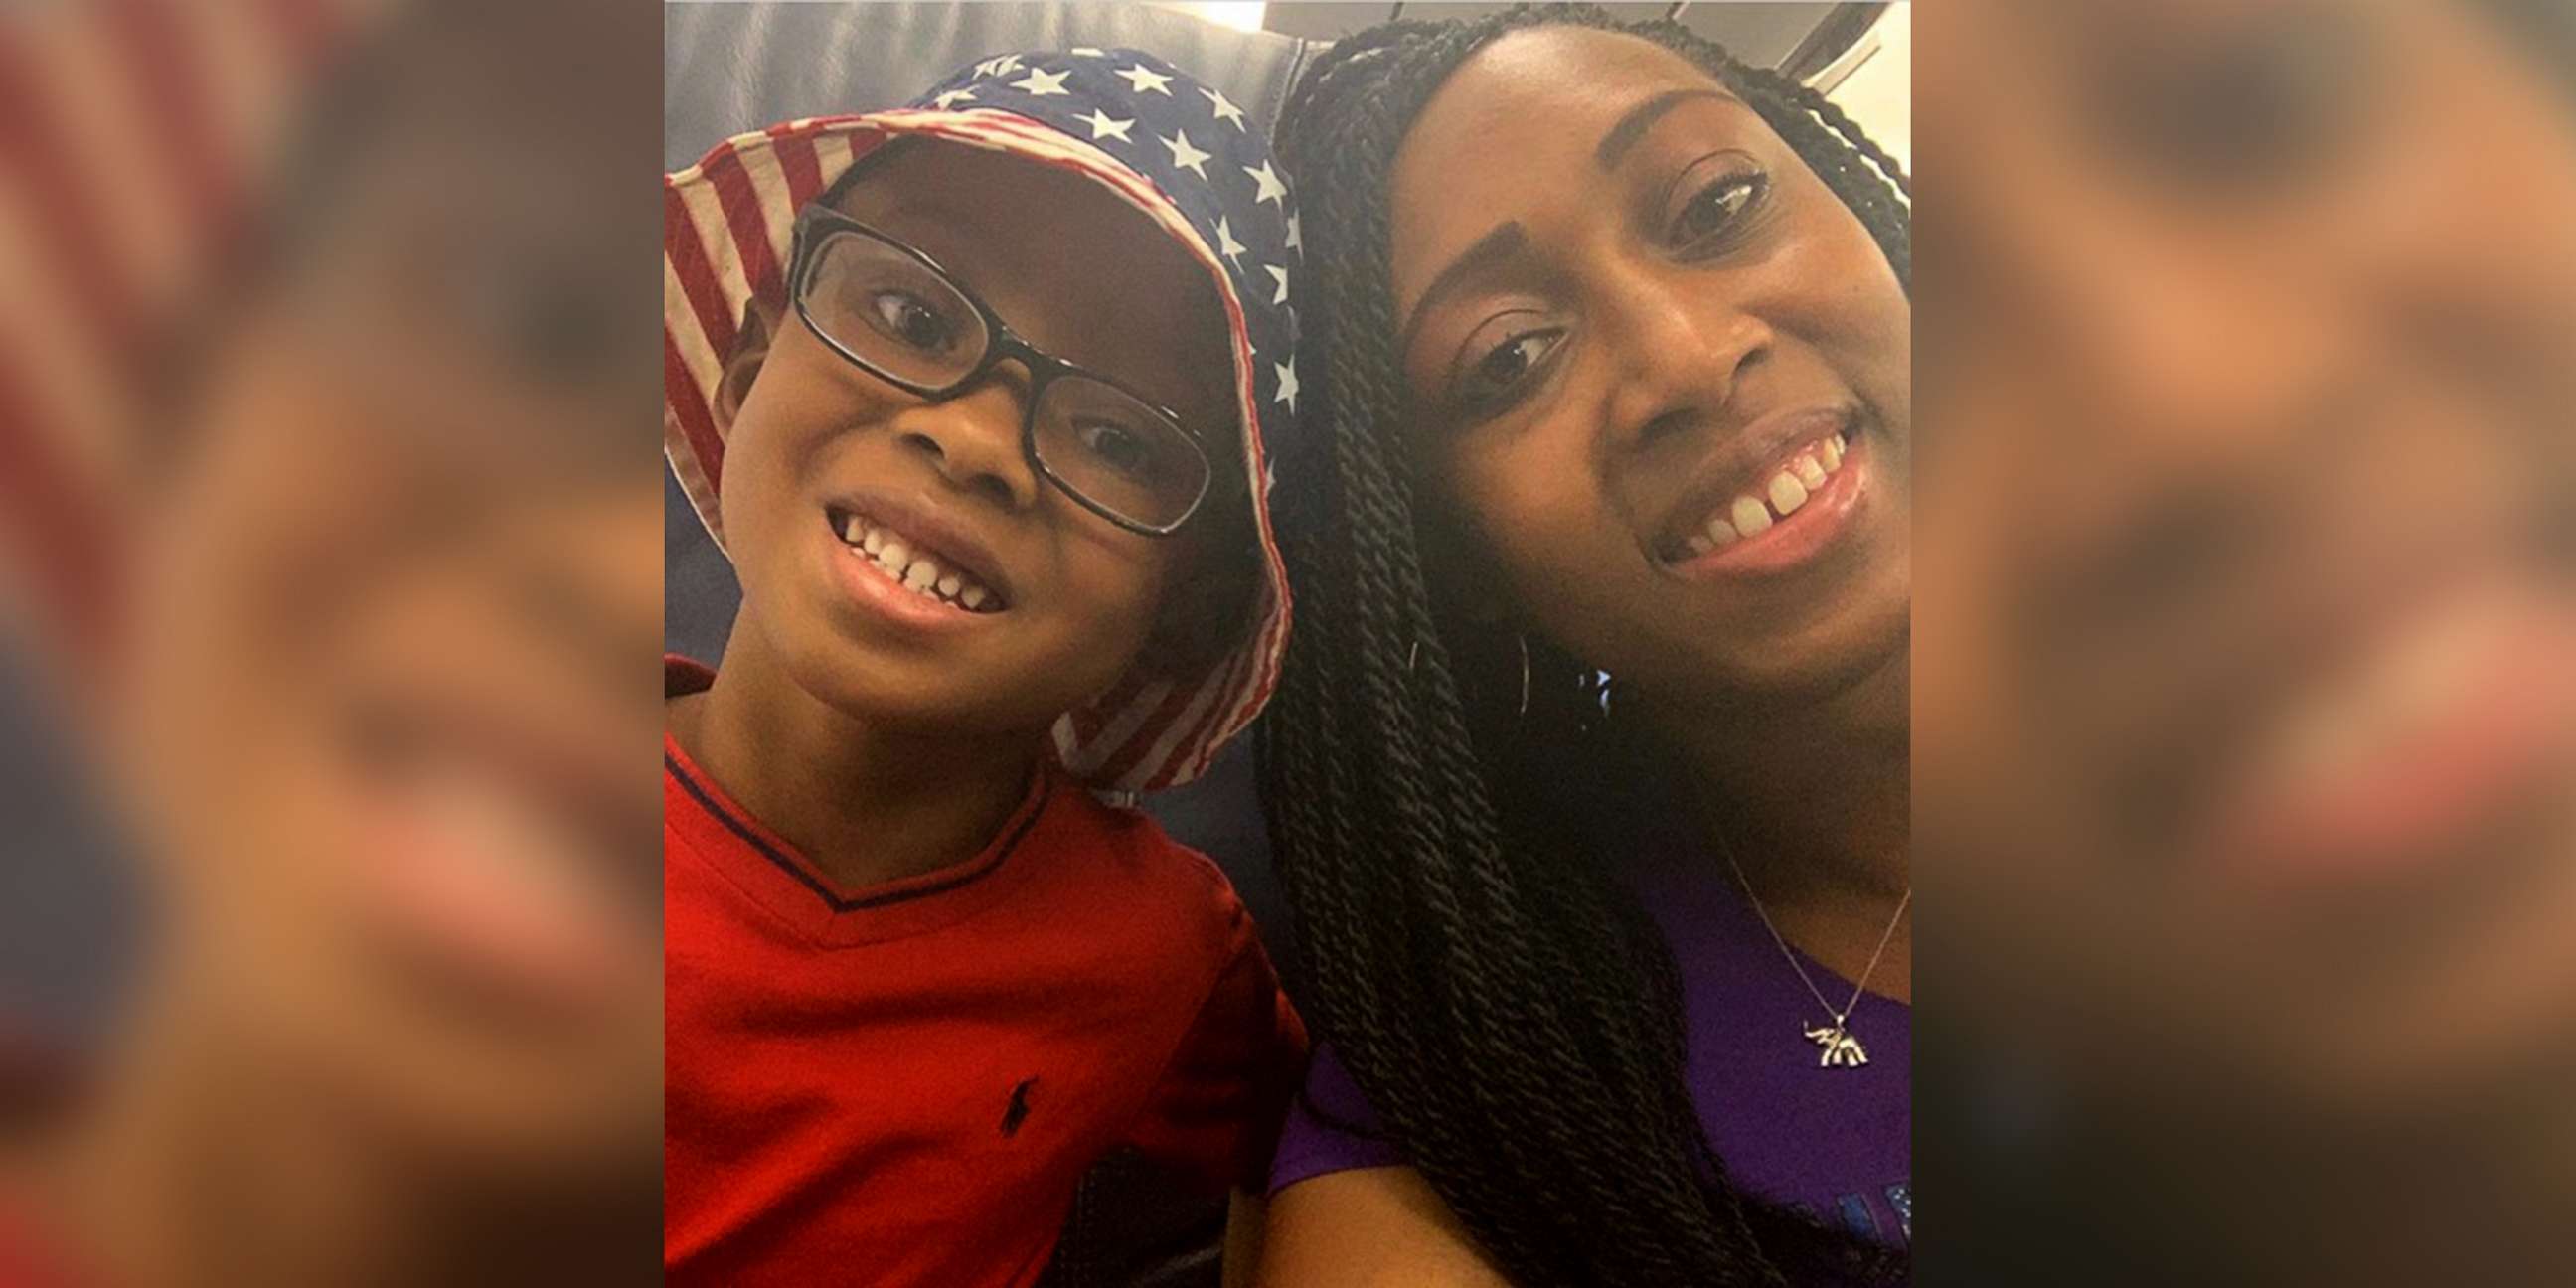 PHOTO: Antonio Gaylord, 6, and his mom, Kanesha Burch, pose for a picture together. Kanesha pursued a master's degree in ABA therapy to help Antonio when he was diagnosed with autism.